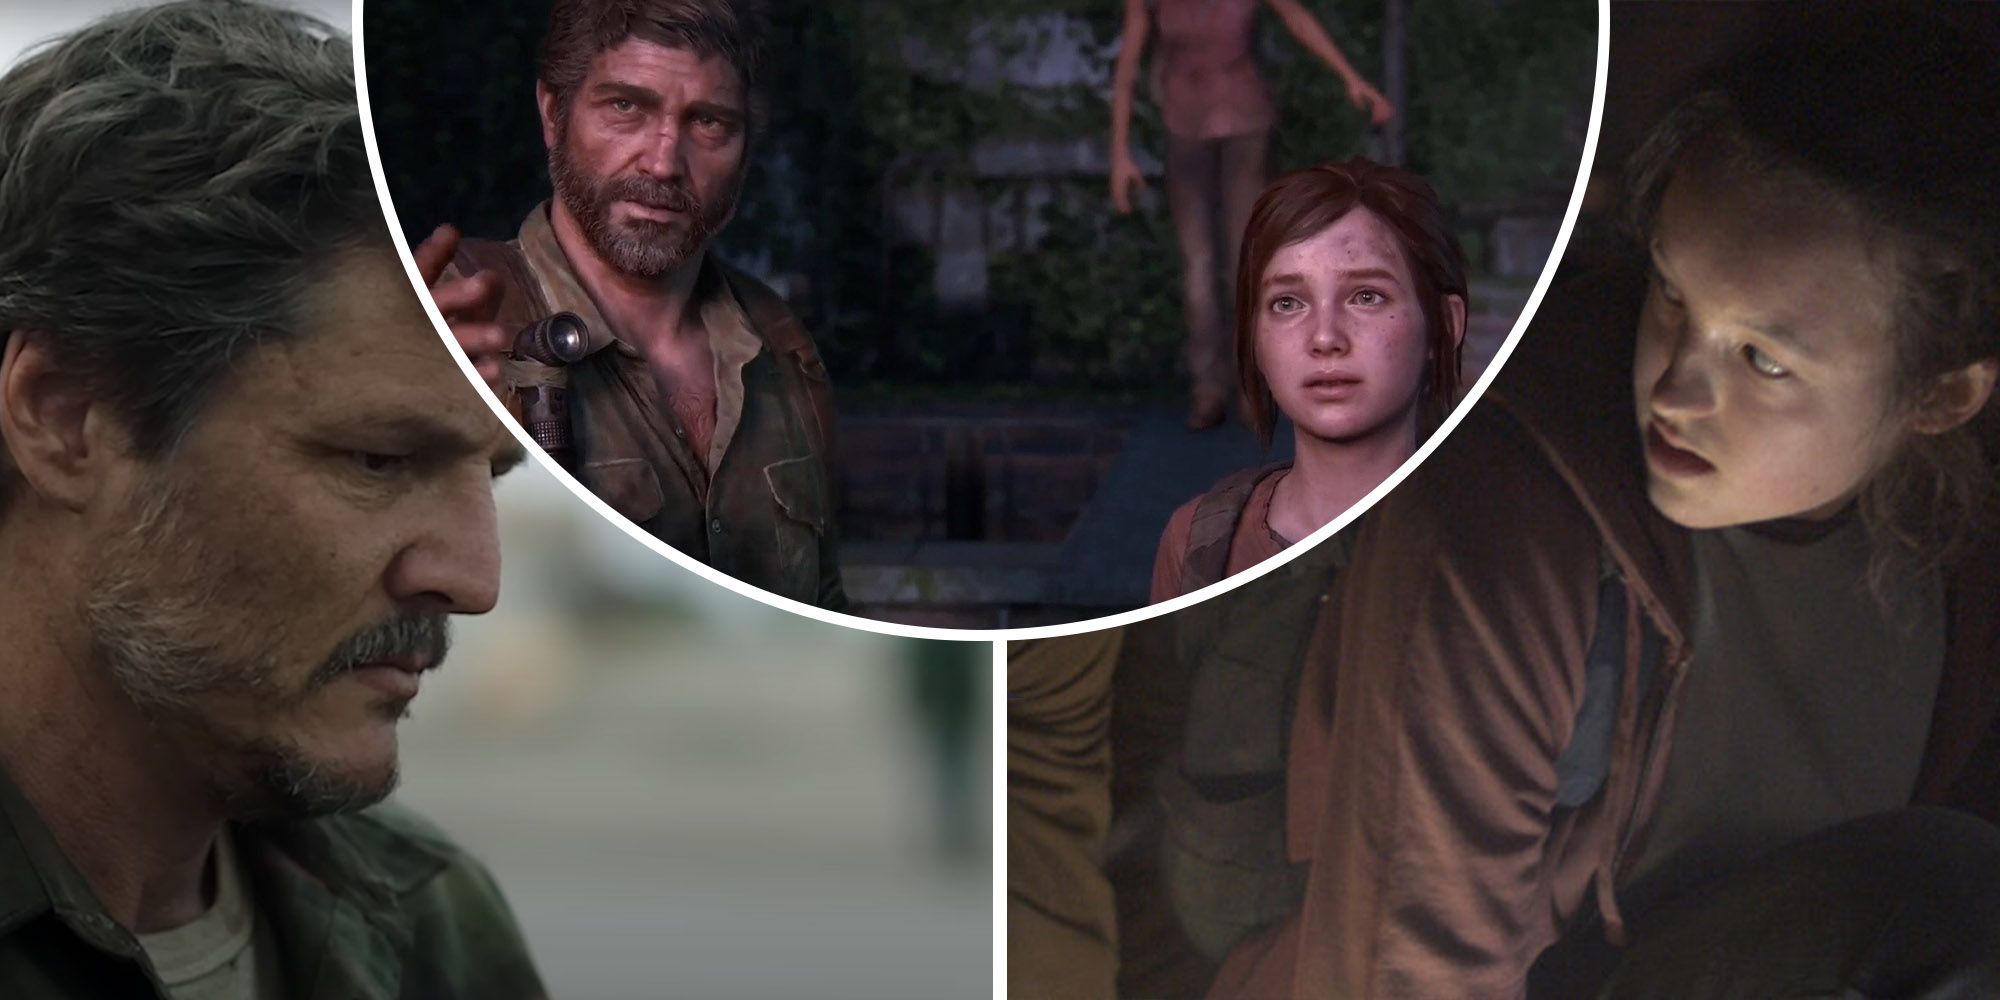 The Last of Us Pedro Pascal as Joel and Bella Ramsey as Ellie